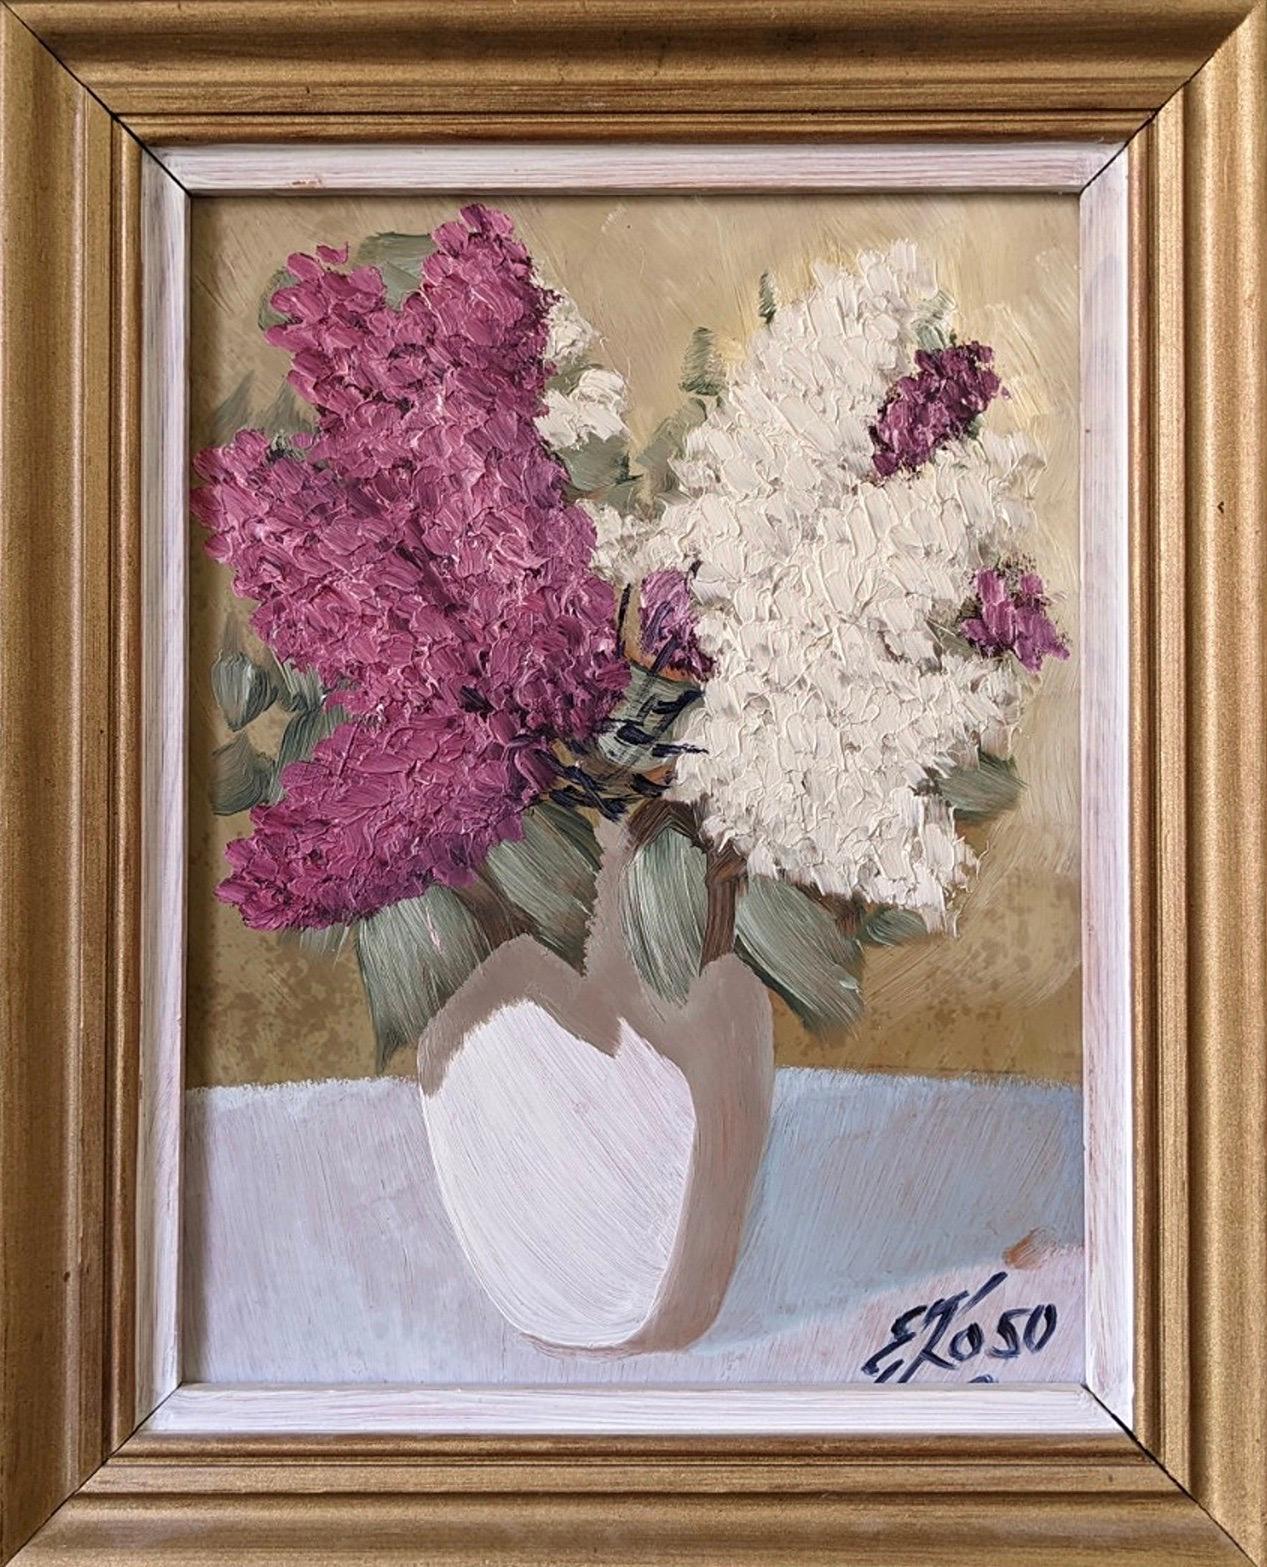 Unknown Still-Life Painting - Vintage Mid-Century Swedish Floral Still Life Oil Painting - Hyacinths